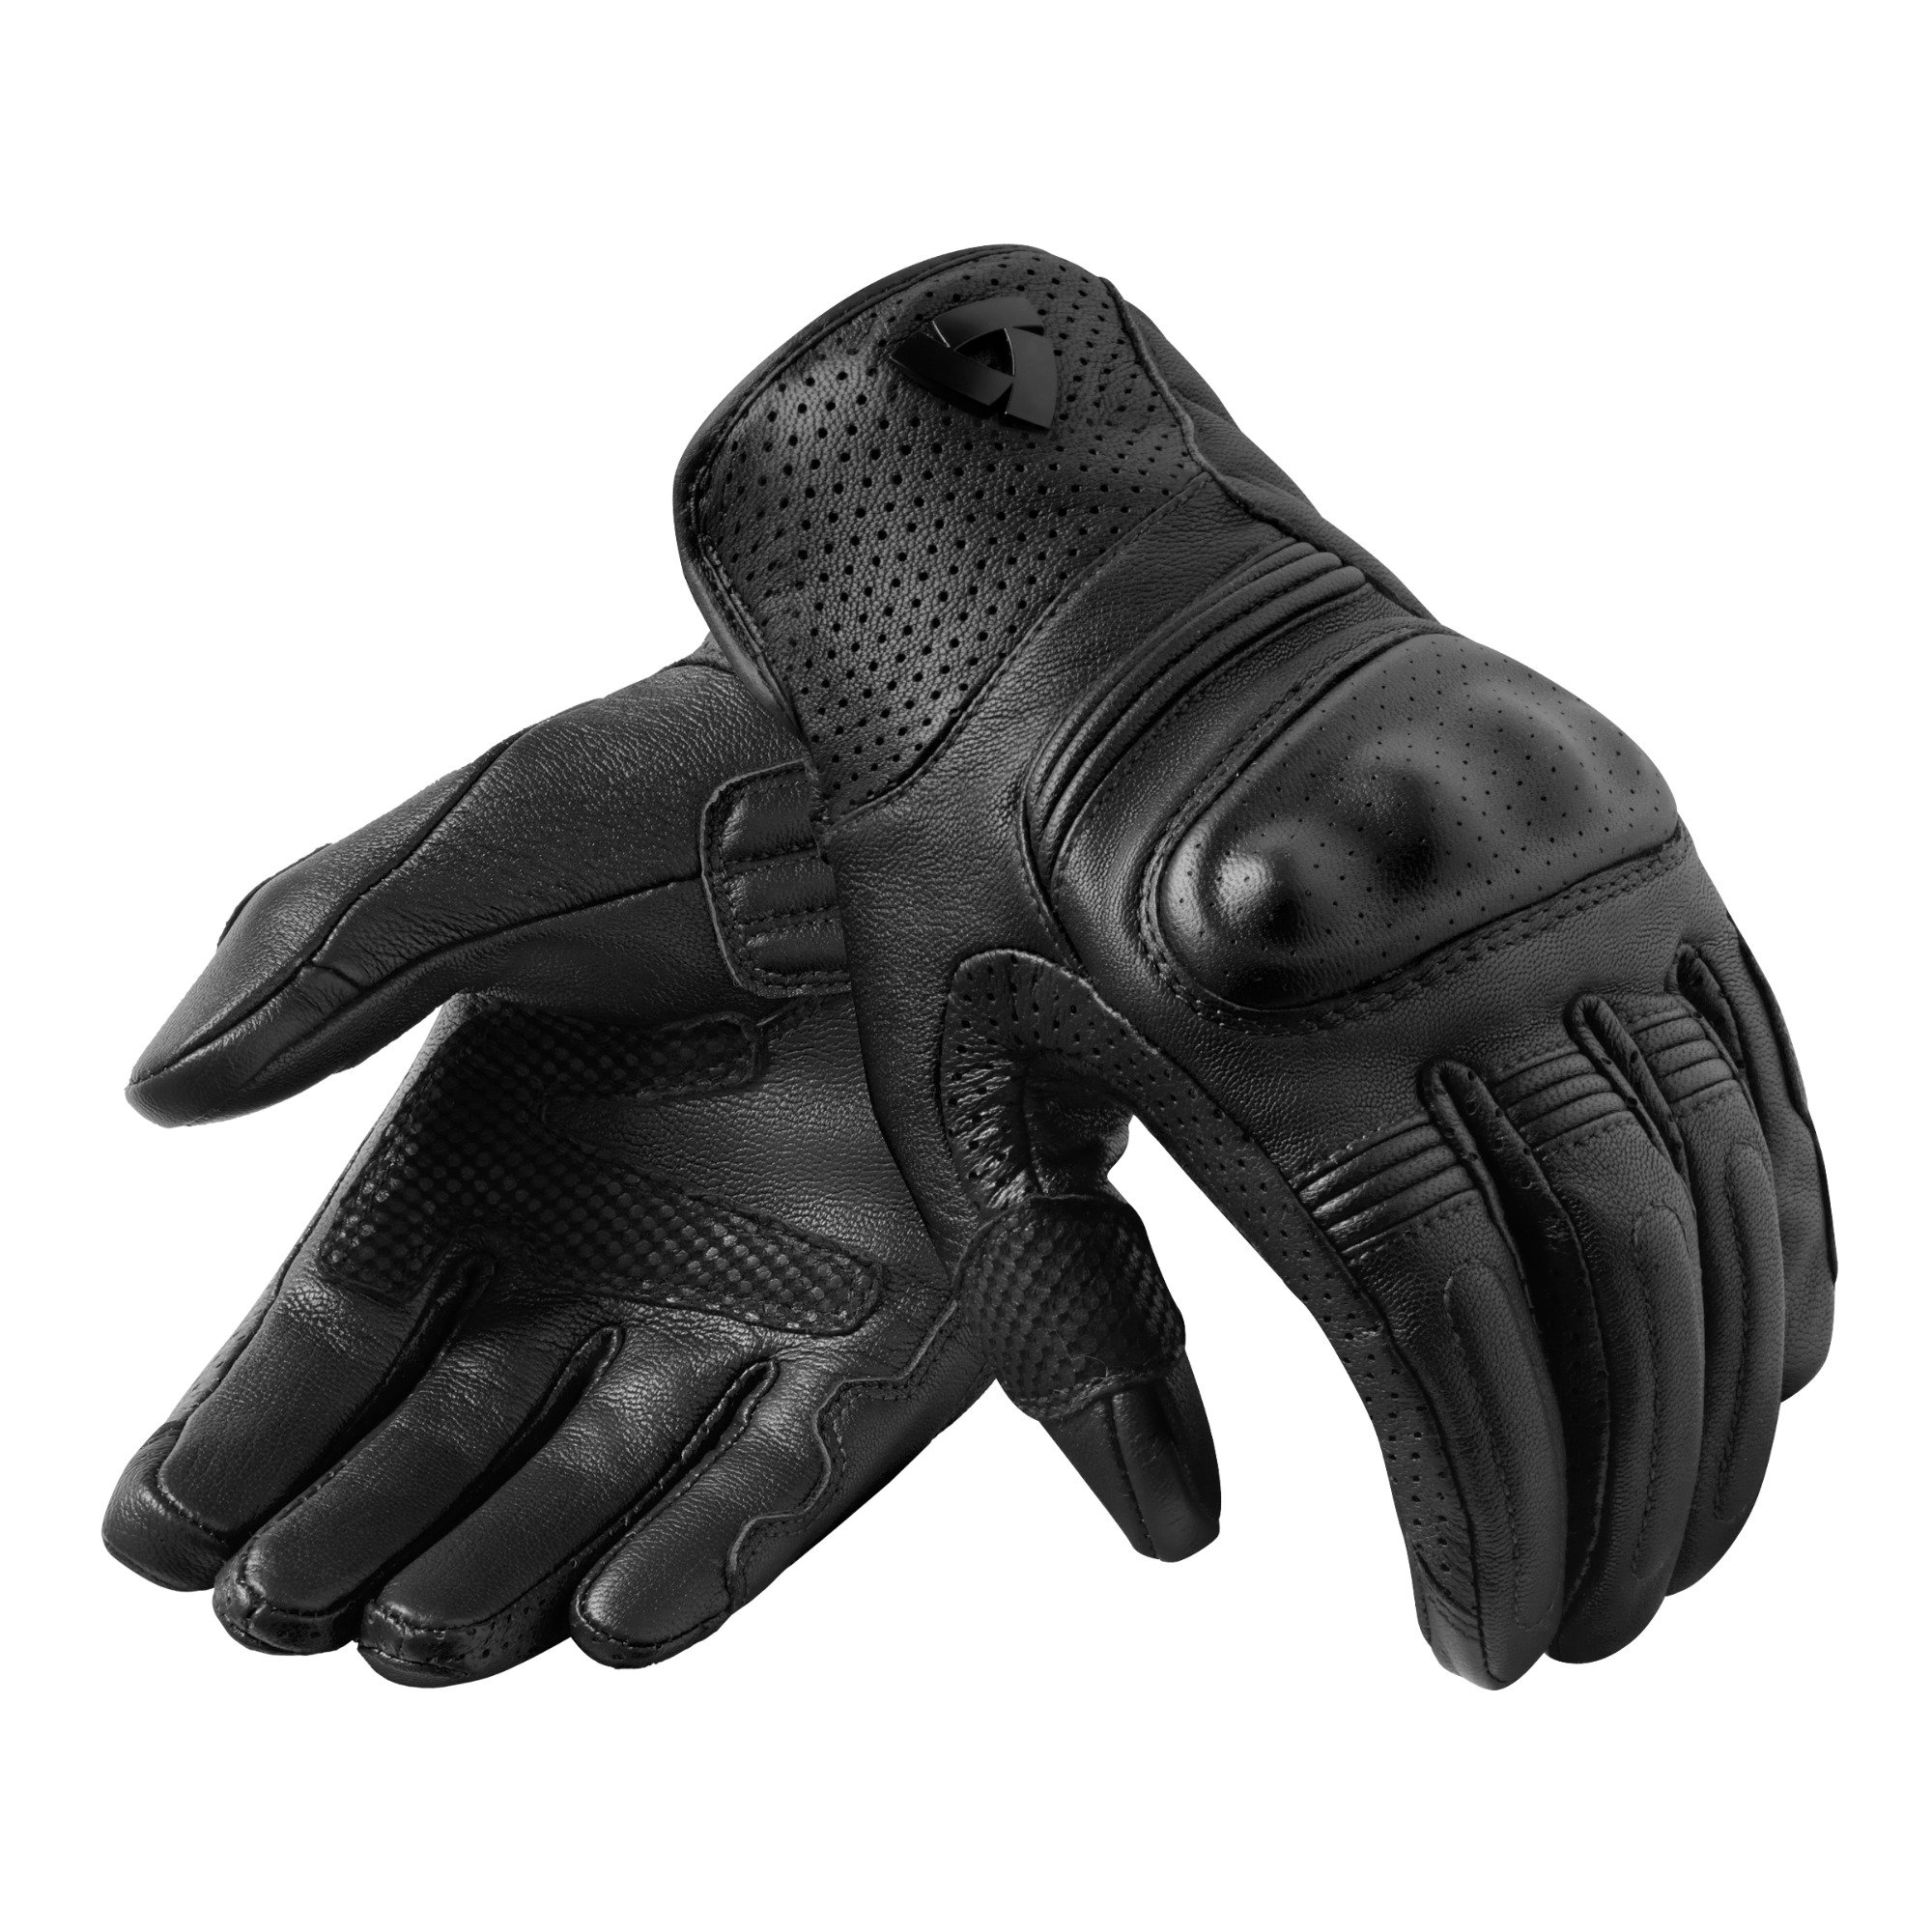 Image of REV'IT! Gloves Monster 3 Black Size 2XL ID 8700001360159